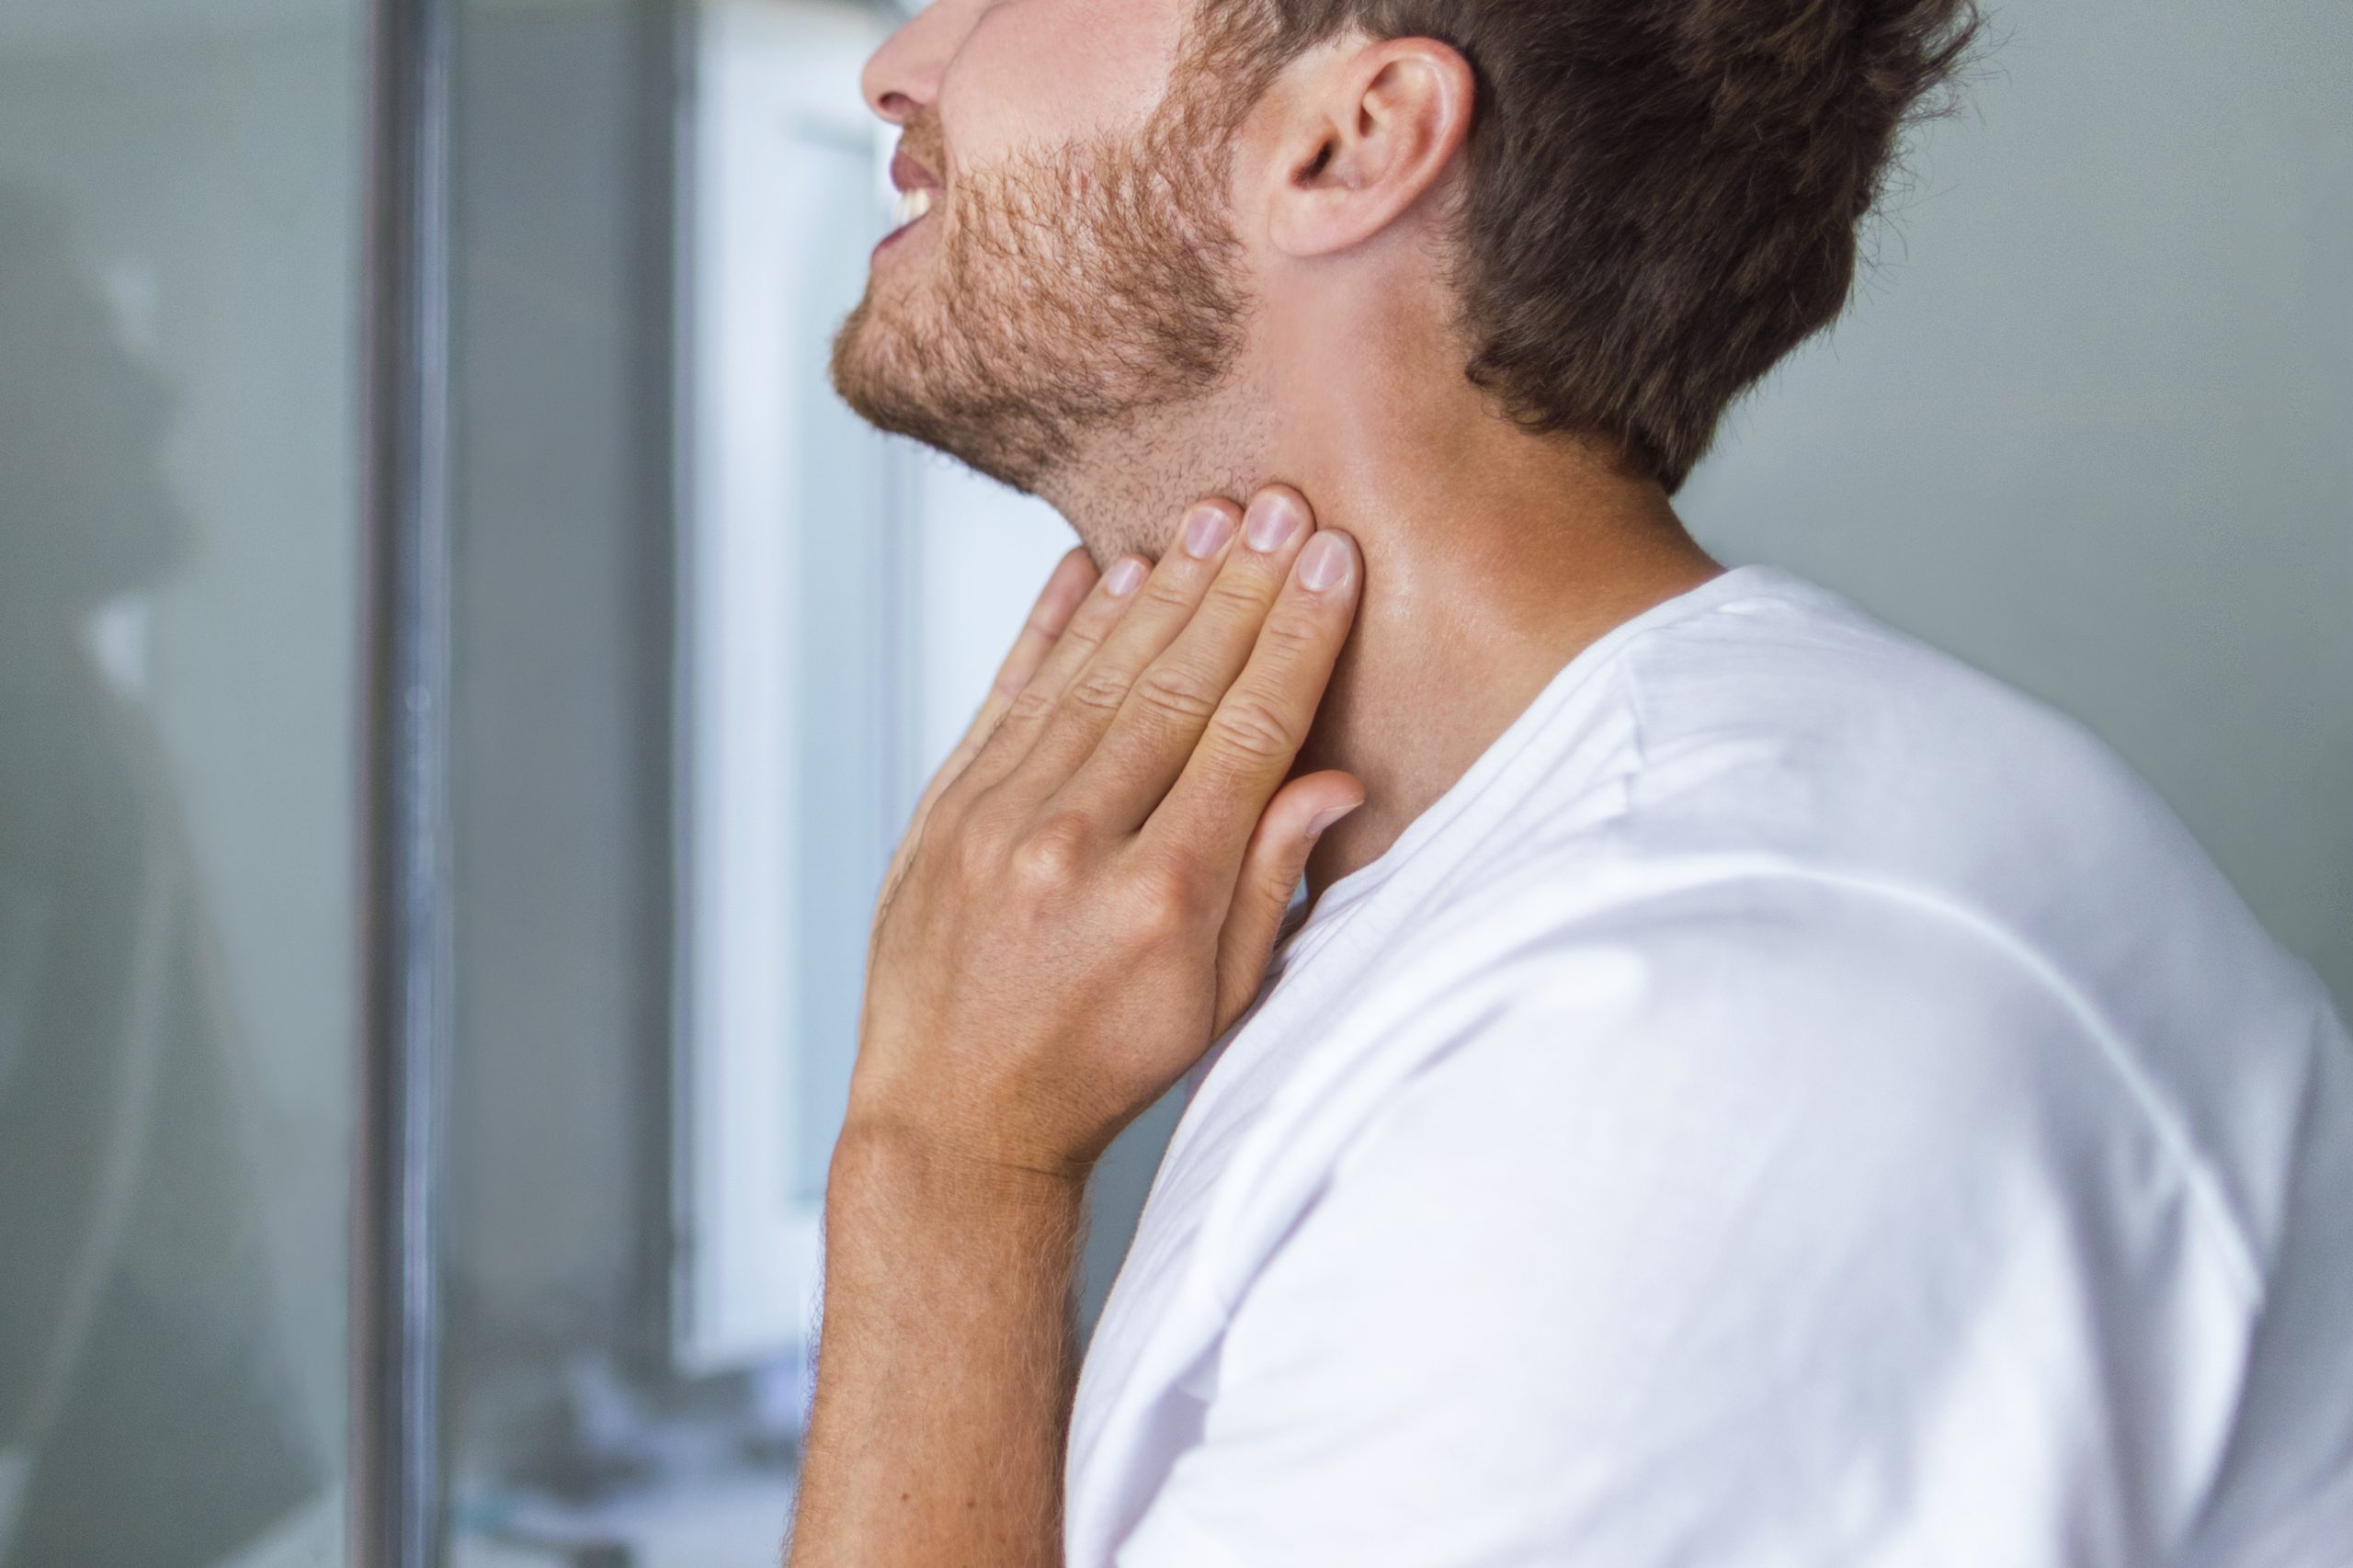 A year after COVID infections, thyroid troubles persist